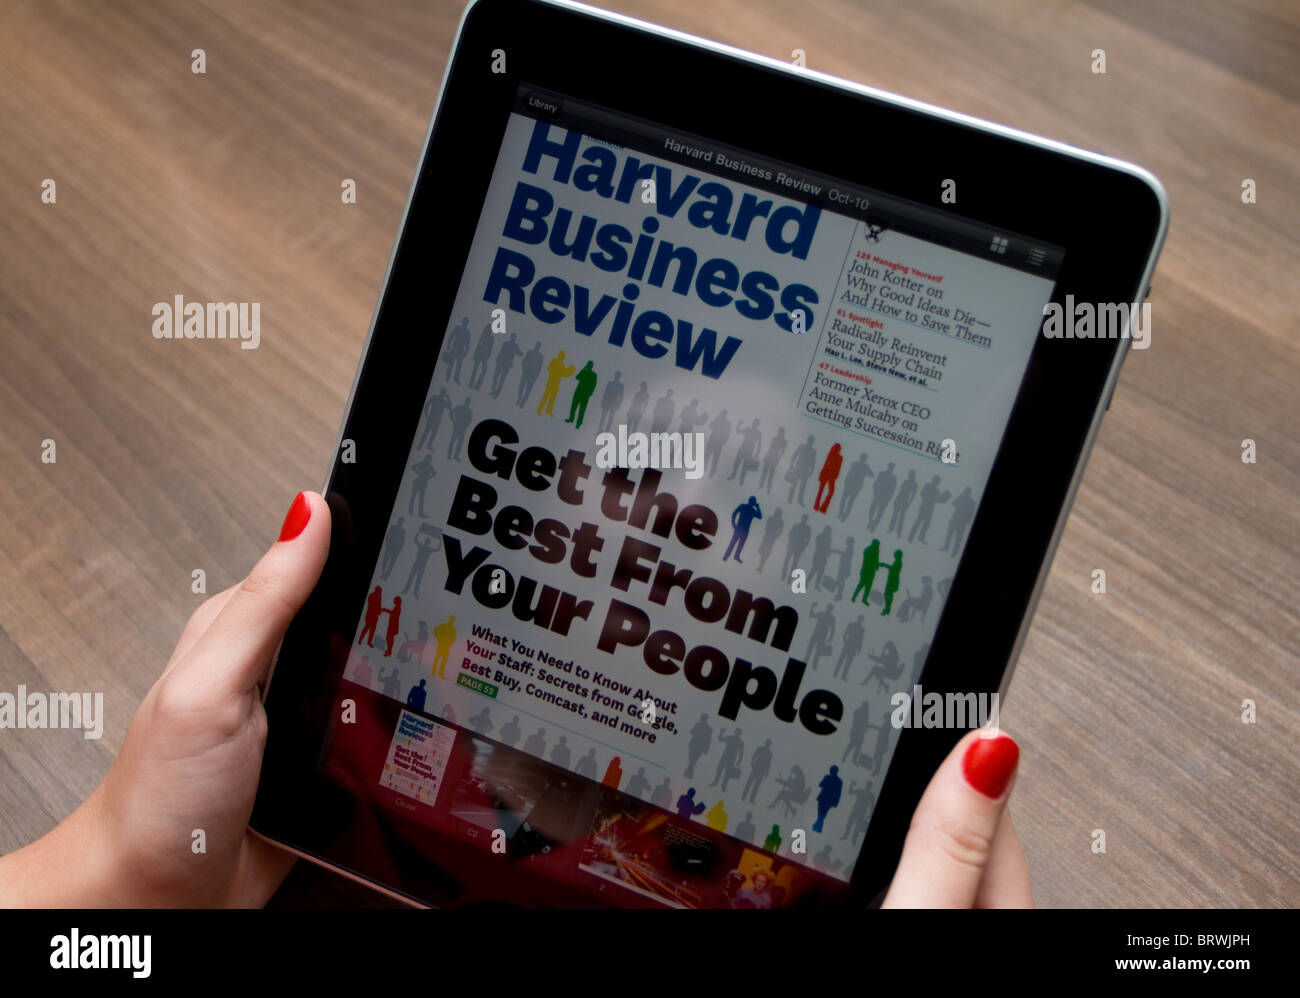 Woman's hands holding an Apple iPad with her reflection on the screen, showing Harvard Business Review Magazine. Stock Photo